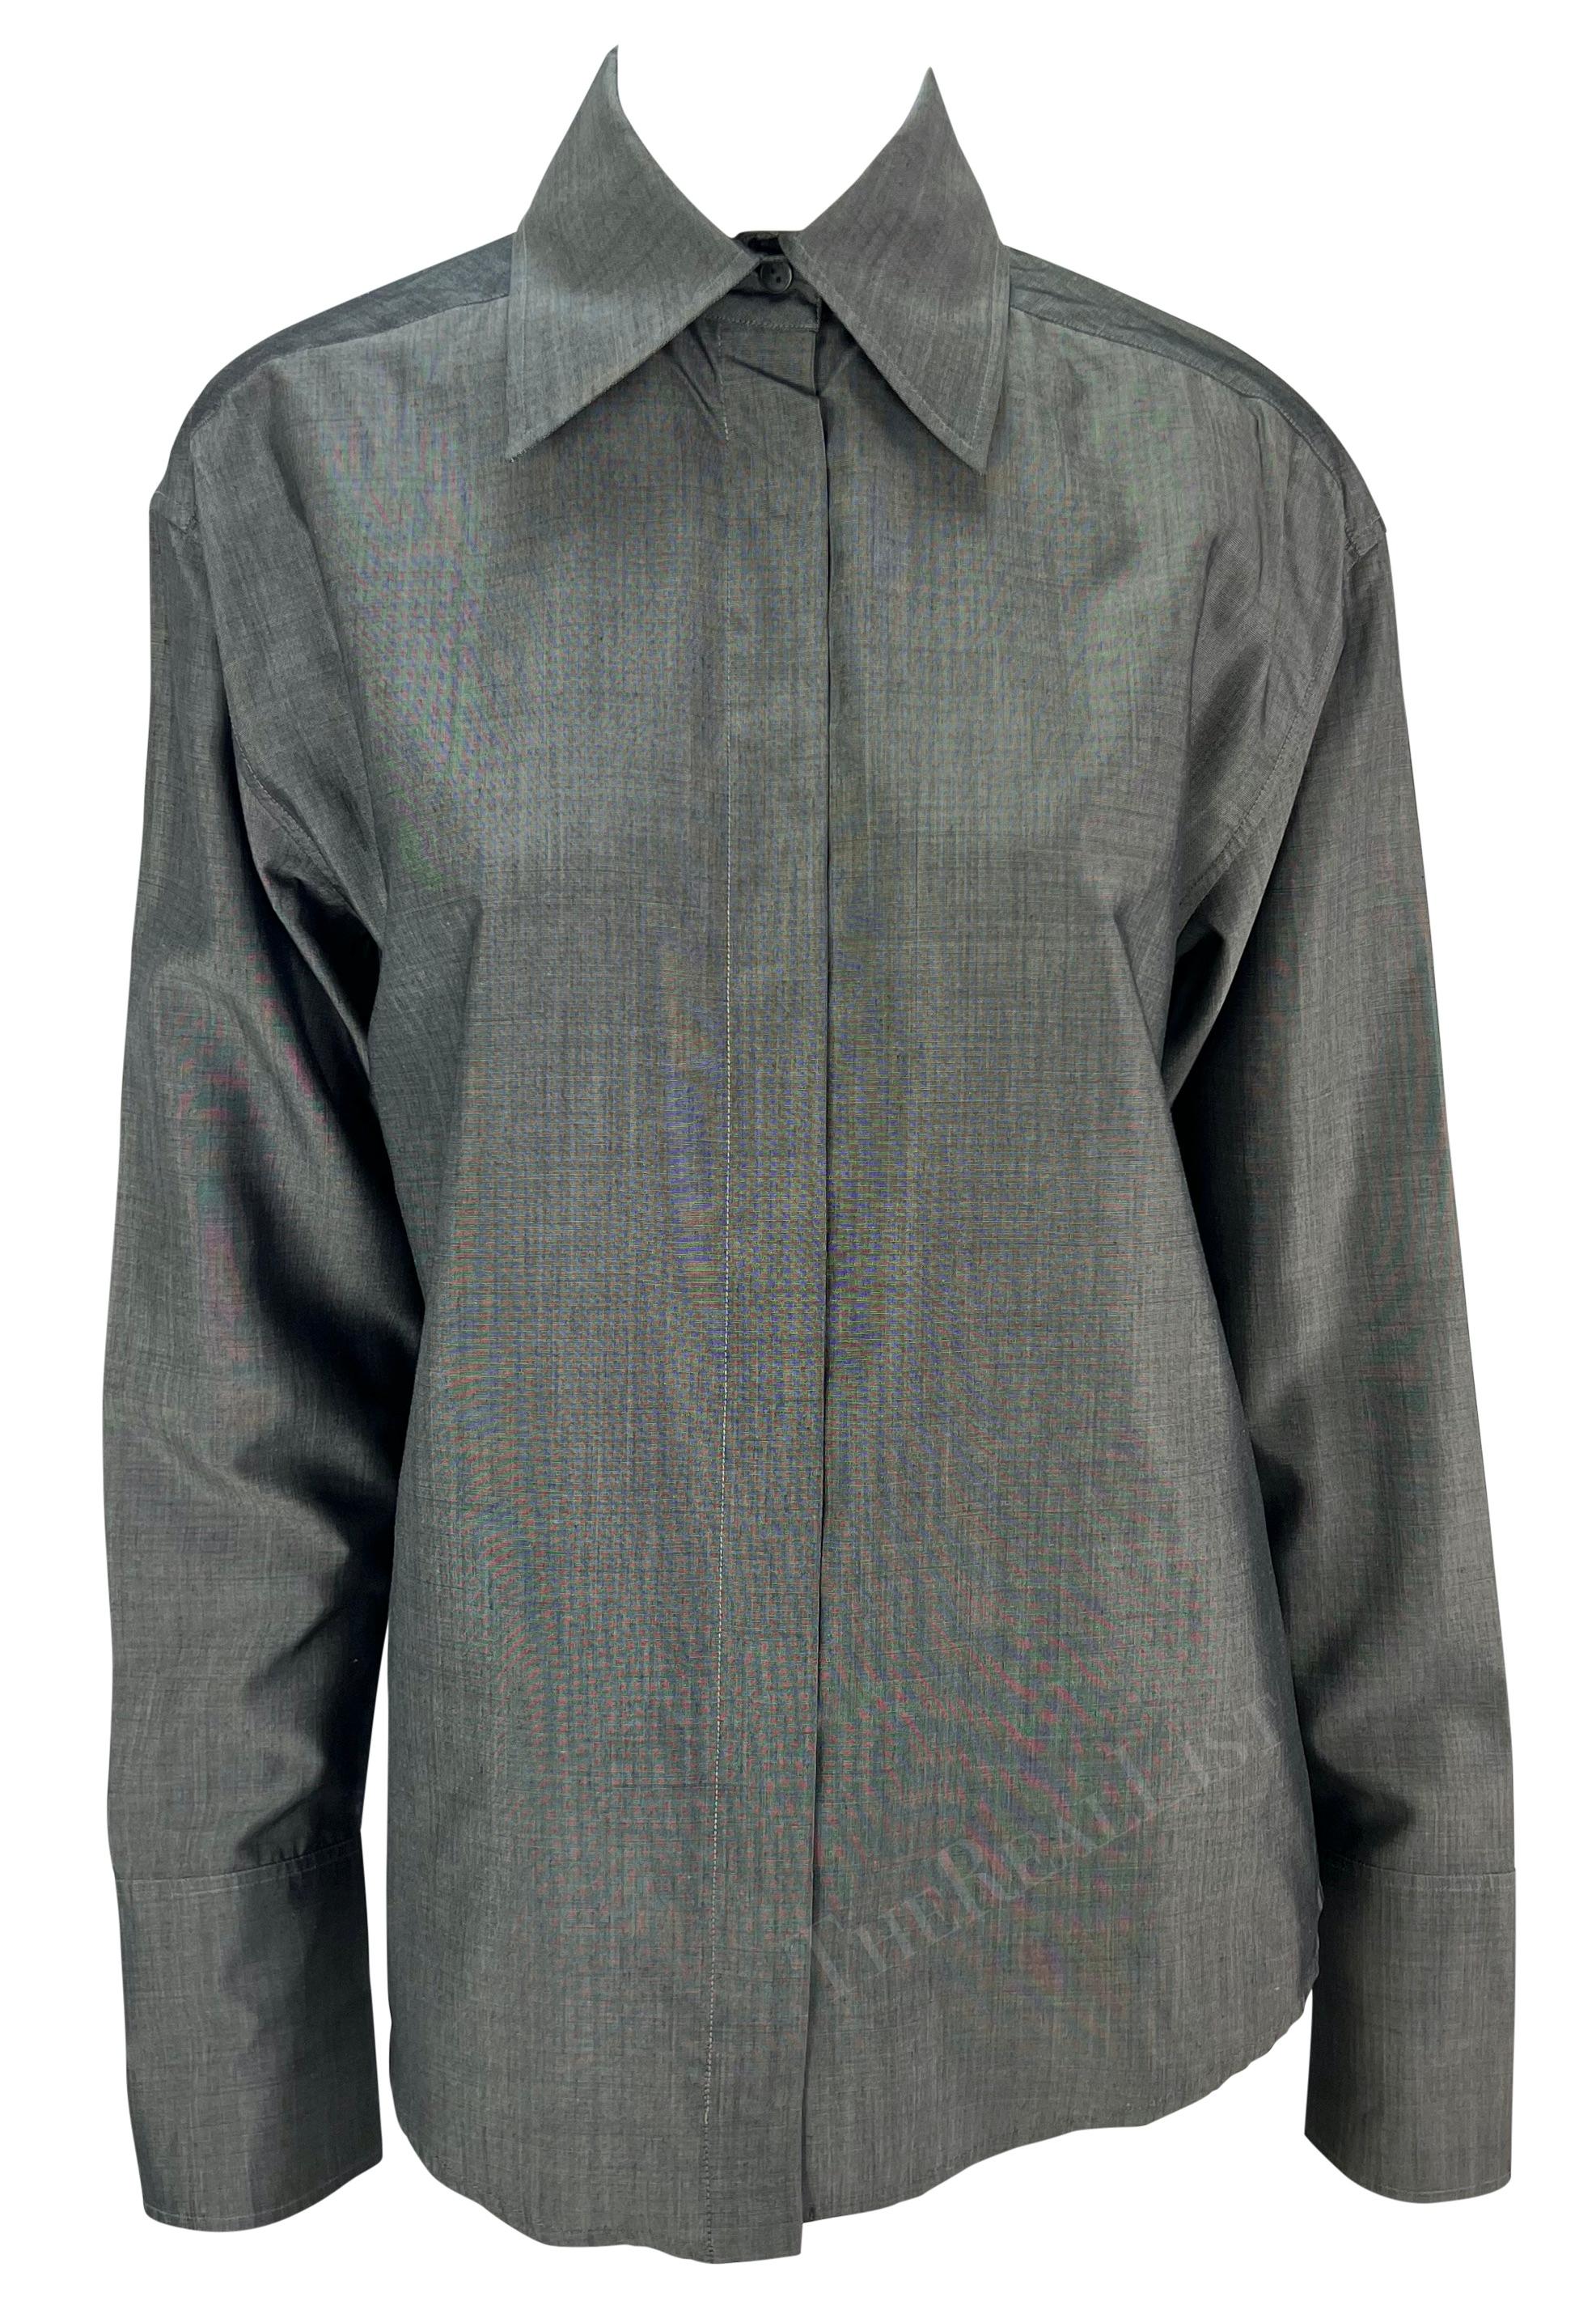 TheRealList presents: a grey Gucci button-up shirt, designed by Tom Ford. From 1997, this chic grey silk top features a hidden button closure down the front, a slightly oversized fold-over collar, and lightly bell-shaped cuffs. Whether paired with